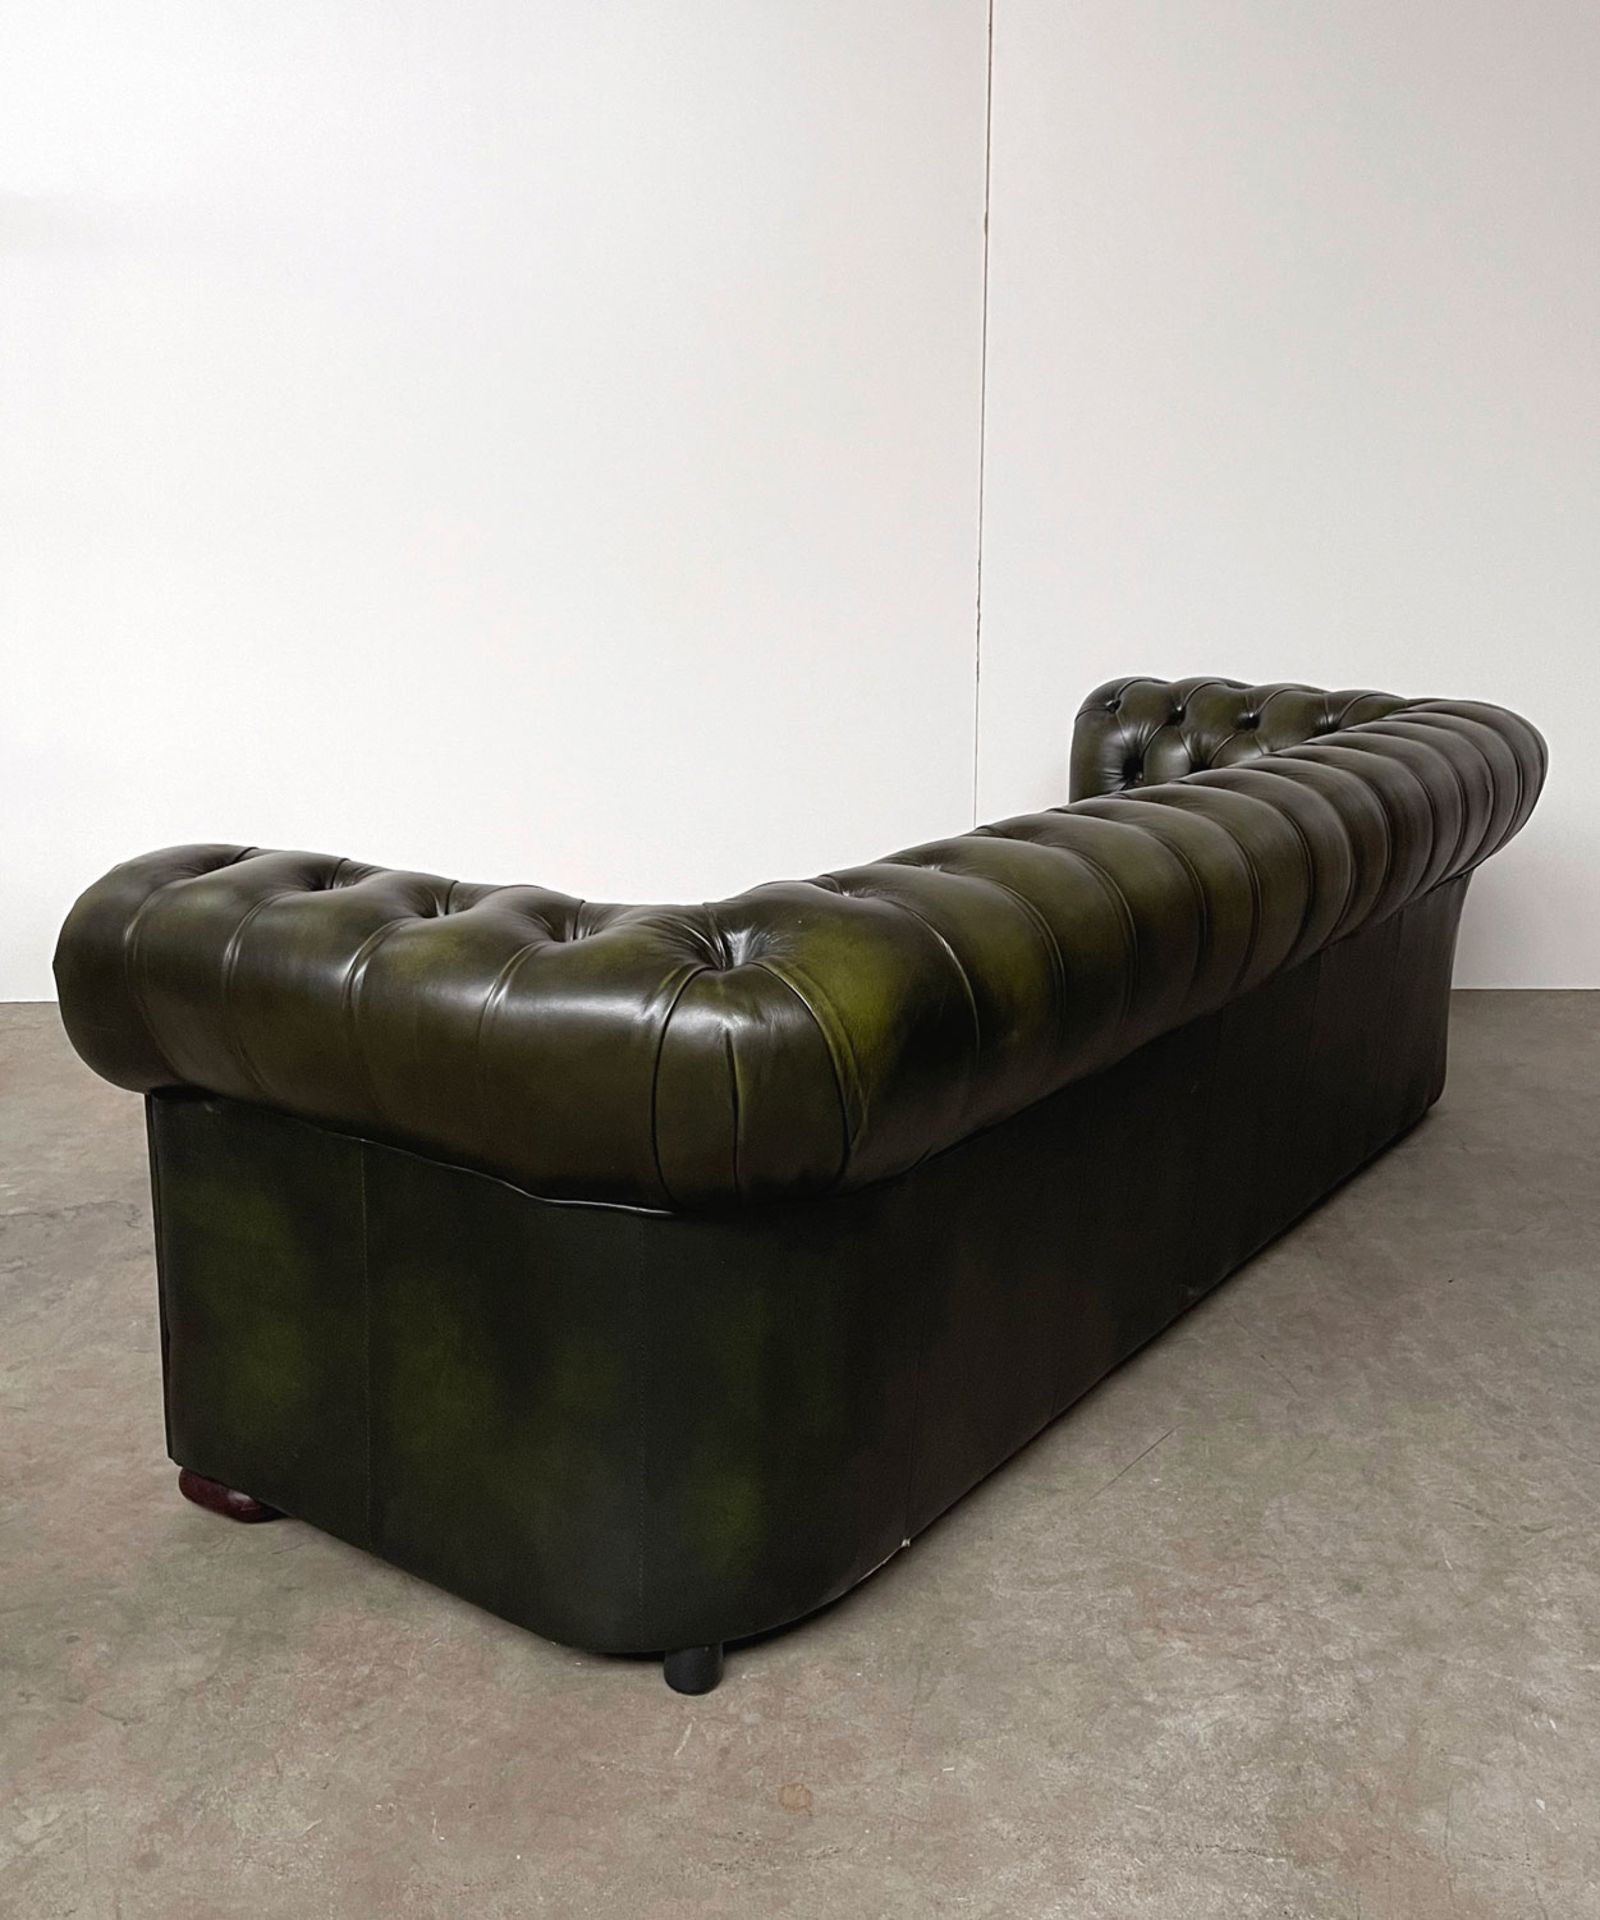 Green Leather Chesterfield Sofa - Image 6 of 10